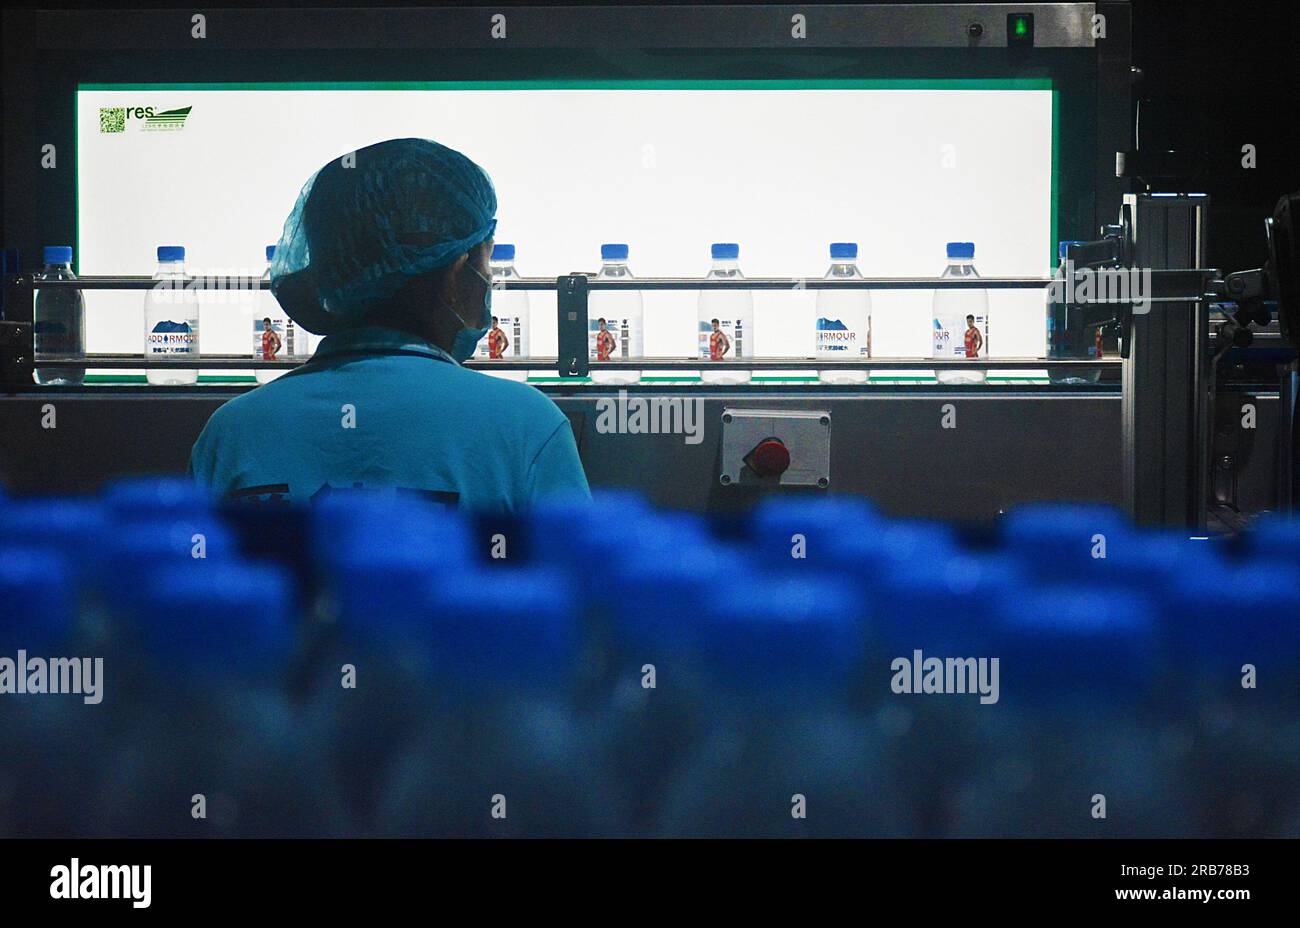 ANQING, CHINA - JULY 8, 2023 - Workers rush to make bottled water at the production workshop of a beverage company in the Economic development zone of Stock Photo